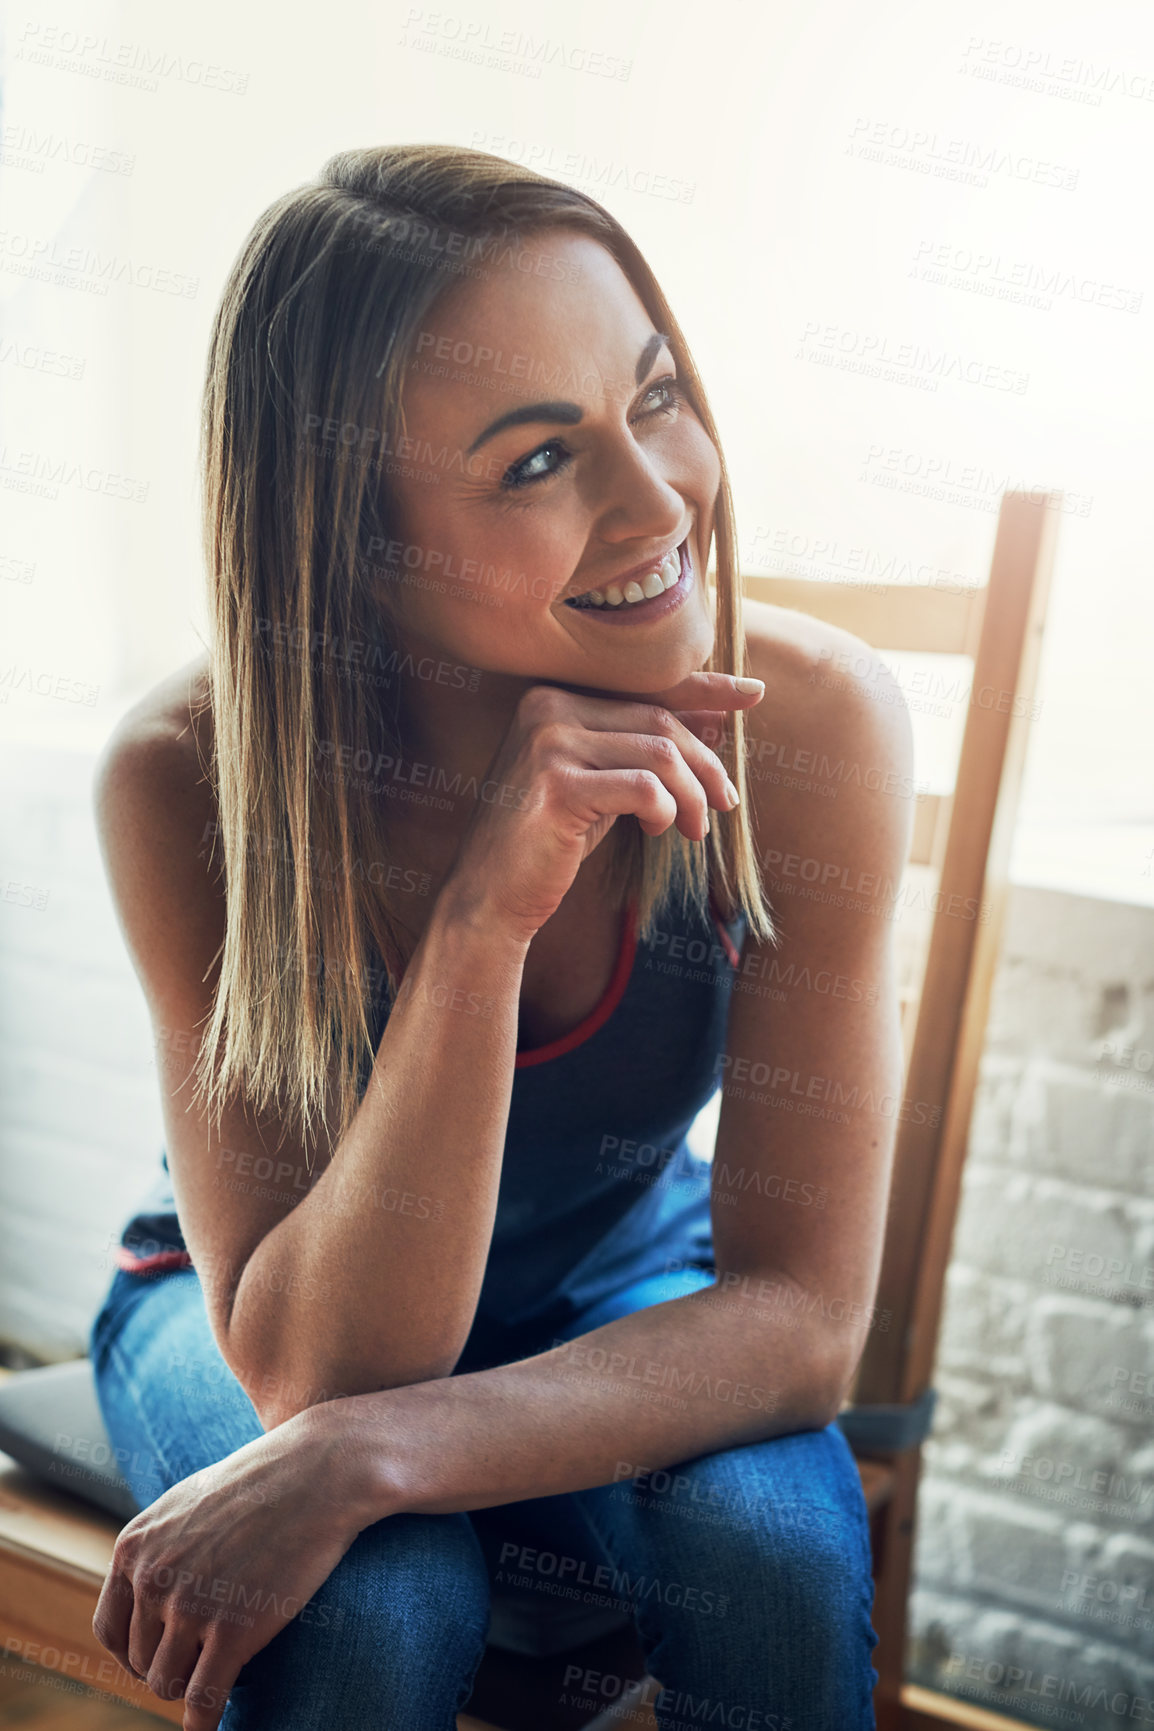 Buy stock photo Cropped shot of an attractive young sportswoman looking thoughtful while sitting on a wooden chair